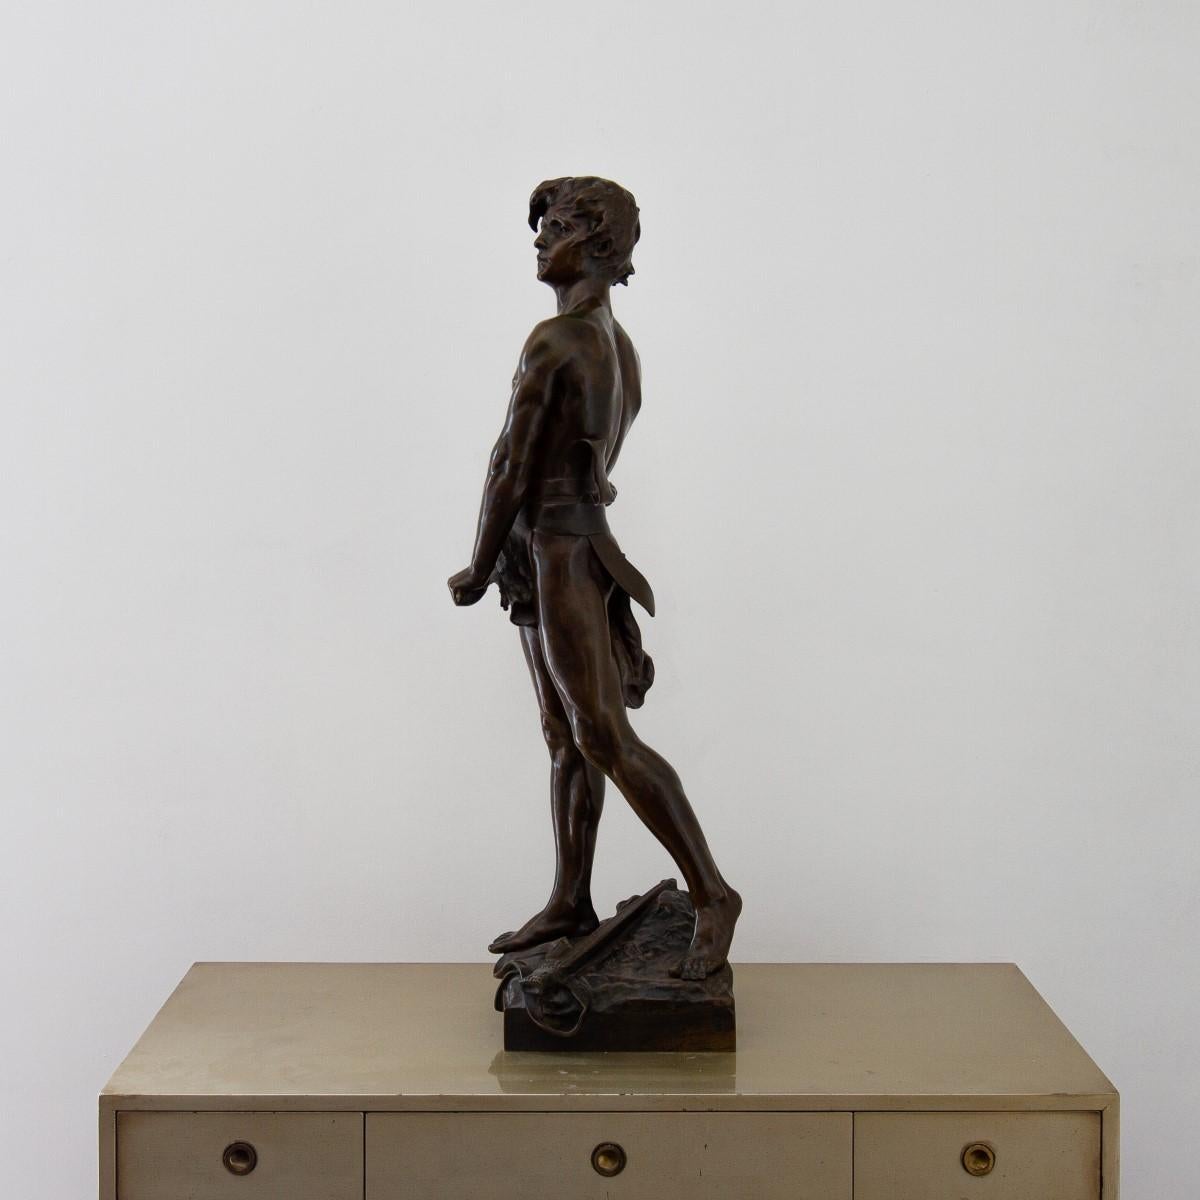 A late 19th century French bronze figure of a young man with a sword, titled 'Vingt Ans' by François-Raoul Larche and cast by Siot-Decauville Foundry, Paris. Signed Raoul Larche to the naturalistic base and the following inscription later added. 'il